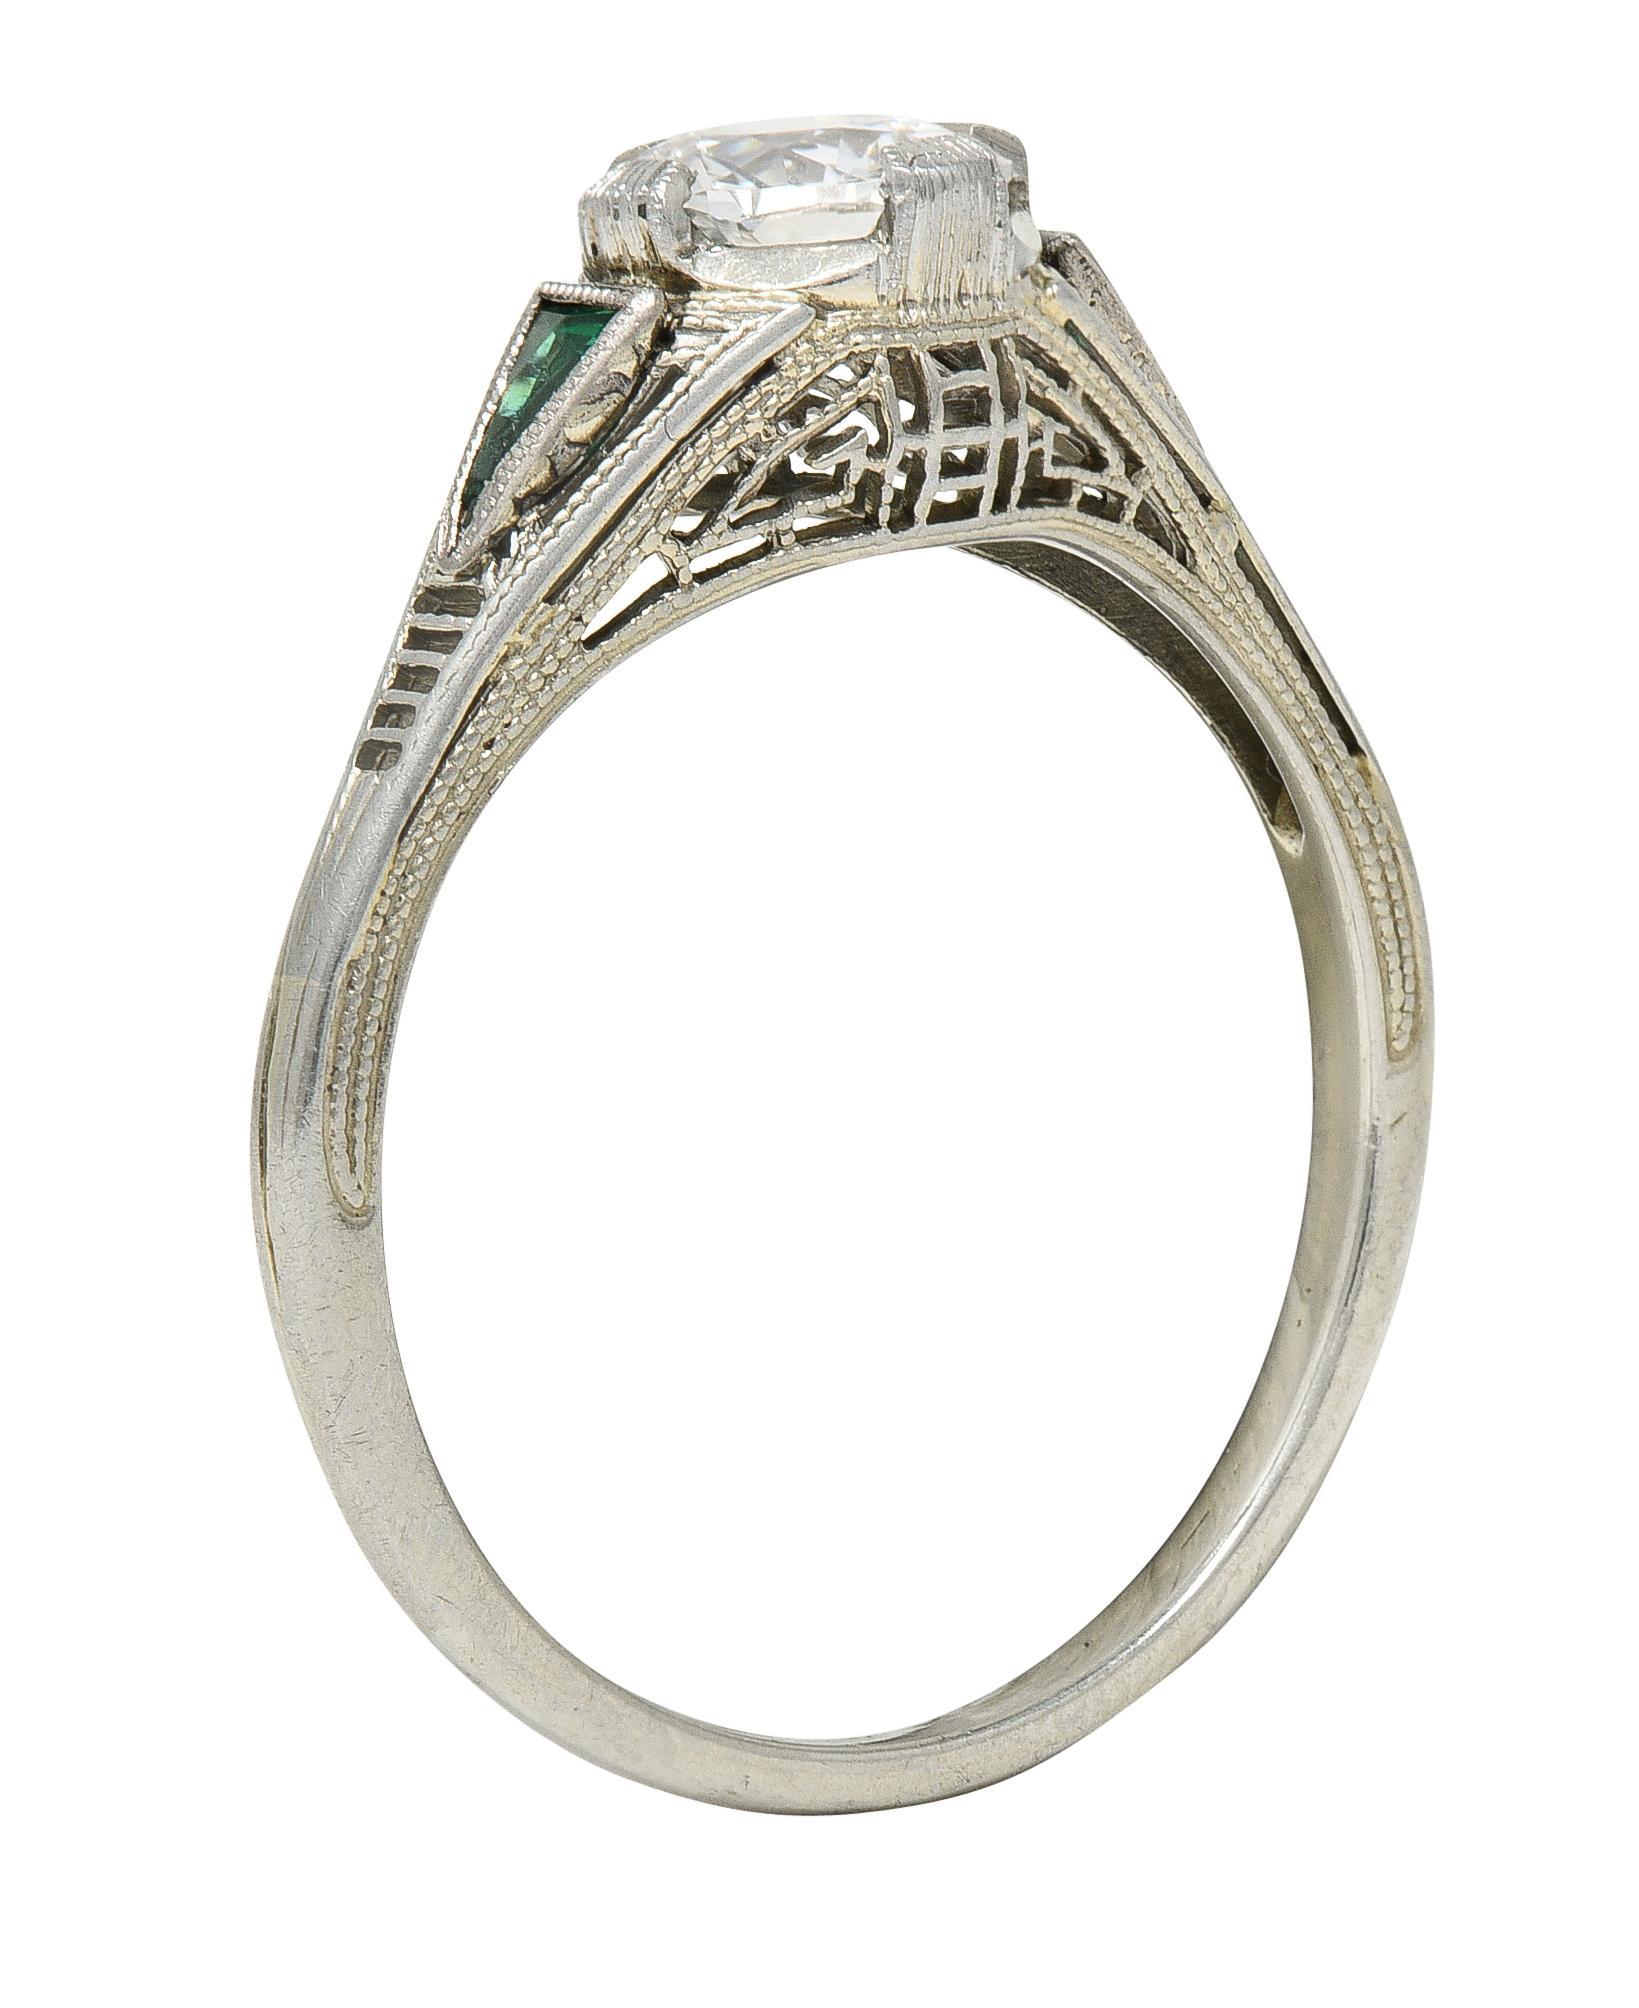 Centering an old European cut diamond weighing .65 carat - G color with VS2 clarity 
Set with compass-style tab prongs flanked by two triangle cut synthetic emeralds
Weighing approximately .06 carat - bezel set 
Featuring a pierced Greek key motif